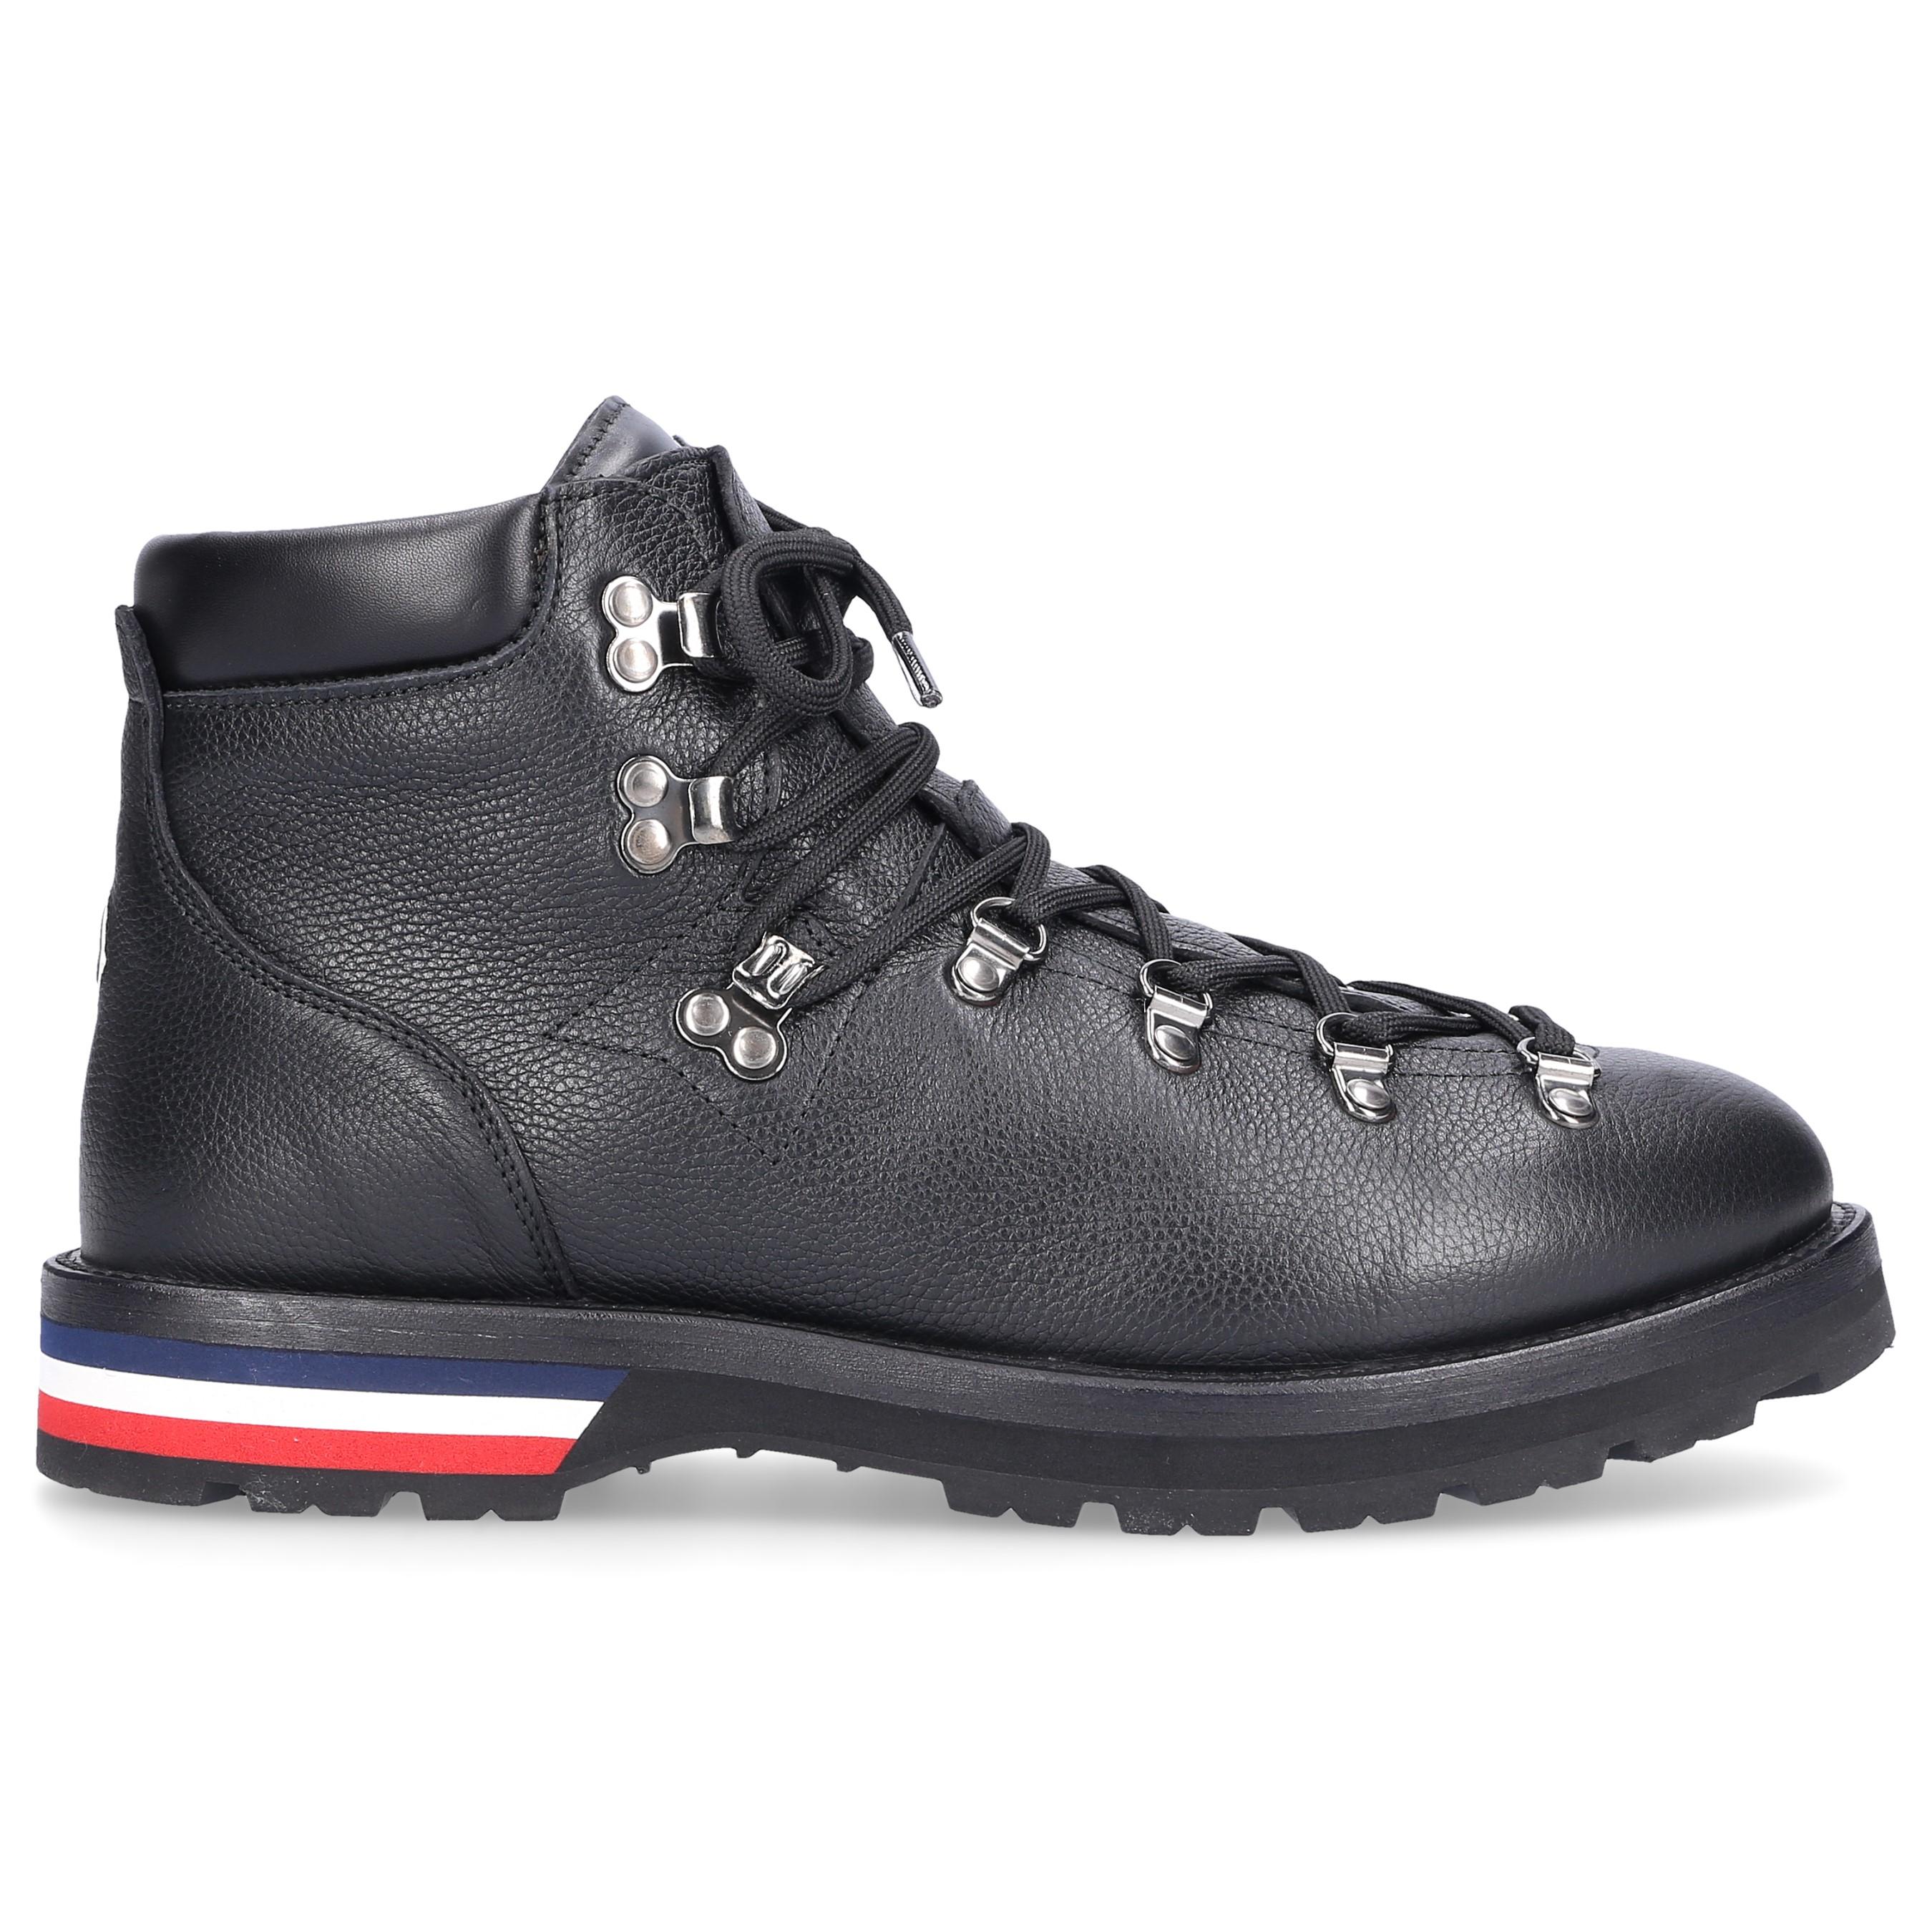 Moncler Leather Ankle Boots Peak in Black for Men - Lyst